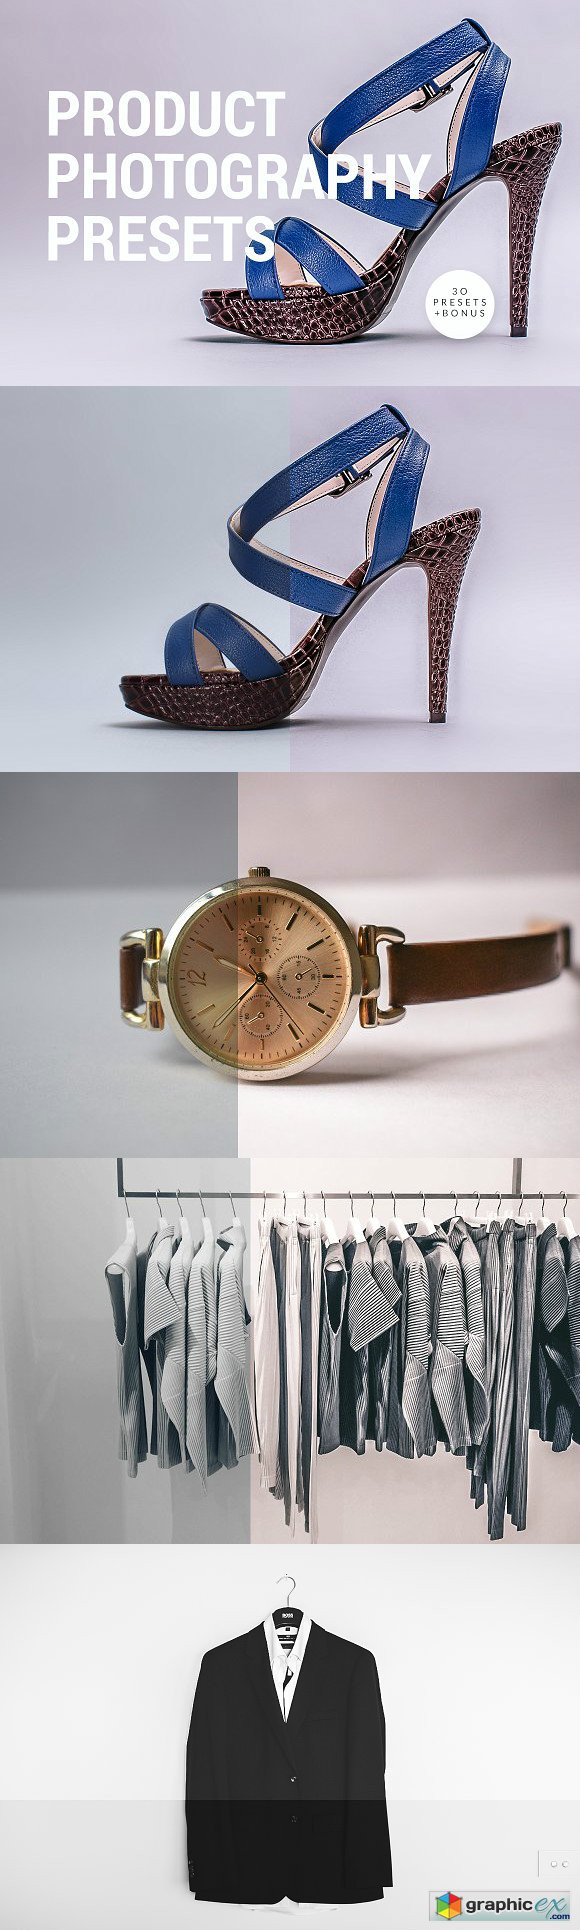 PRODUCT Photography Presets